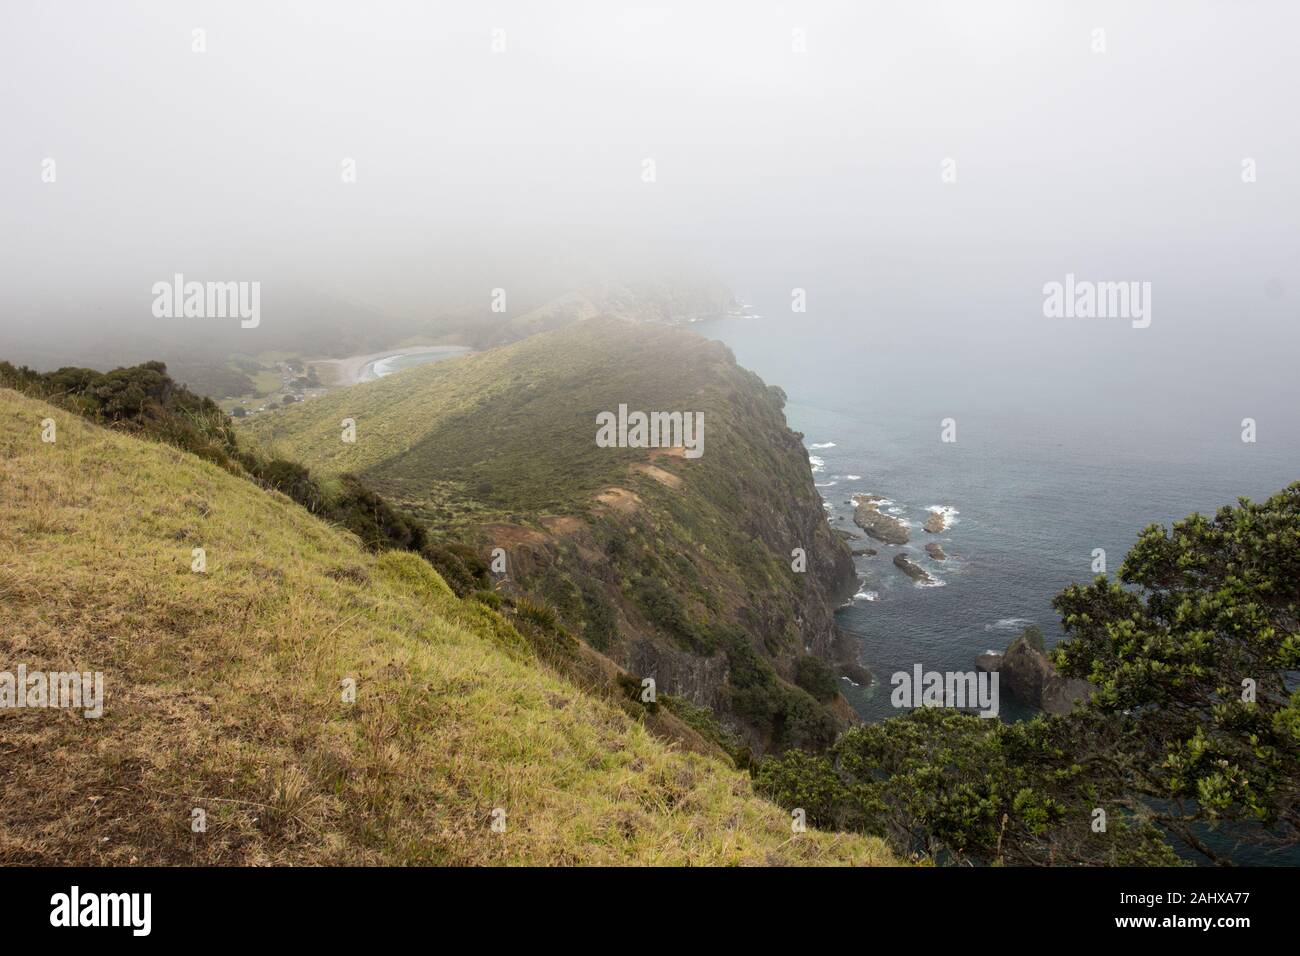 A cloud covered view of the Te Paki Coastal Track, Northland, New Zealand, and Tapotupotu Bay beyond Stock Photo